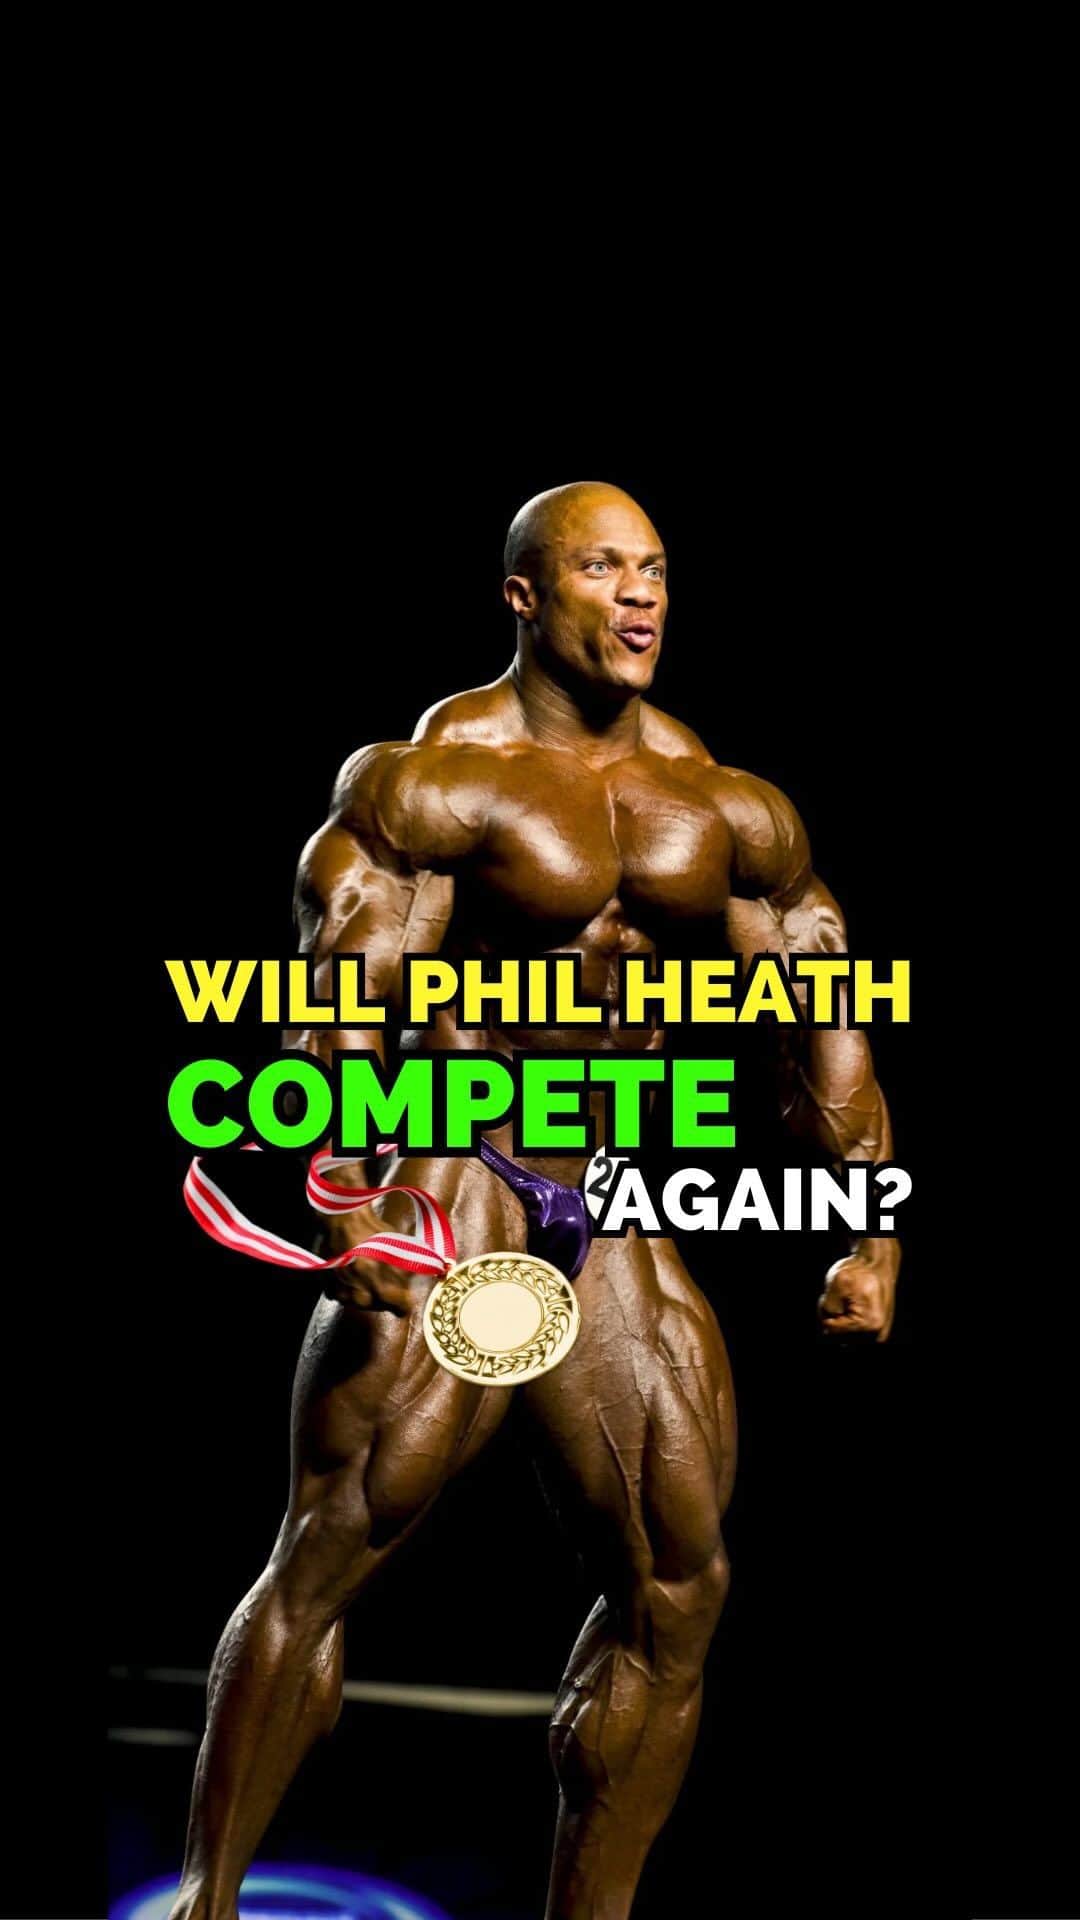 Phil Heathのインスタグラム：「Is Phil Heath going to compete this year?! 😱🤯  🔗 Click The Link In our Bio  🗓️ Fill Out a Patient Intake Form⁣⁣ We’ll Help Find the Right Treatment Options!  ✅ USA’s Leading HRT Telehealth Provider⁣ ✅ Physician Directed ✅ FDA-Approved Lifestyle Solutions⁣ ✅ Lowest Costs In The Industry ⁣  🇺🇸 Veteran Owned & Operated⁣  Disclaimer: Any content posted on this Instagram account is for entertainment, educational and knowledge purposes only and is not intended as medical advice. We always recommend consulting with our team of licensed healthcare providers before making any changes to your wellness or medical routine. Our content is intended to promote wellness and healthy approaches to lifestyle choices. By viewing and engaging with our Instagram content, you agree to this disclaimer.  #fitnessjourney #fitnesslifestyle #fitnessgoals #fitnessinspiration #fitnessaddicted #fitnesstips #fitnessgoal #transcend #wellnessfriday #wellnessjourney #fridaymotivation #wellnessfitness #wellnesslife #hrt #hormonereplacementtherapy #hormonetherapy #fitnesscommunity #peptidetherapy #transcendhrt #transcendcompany #weightloss #weightlosstransformation #weightlossgoals」